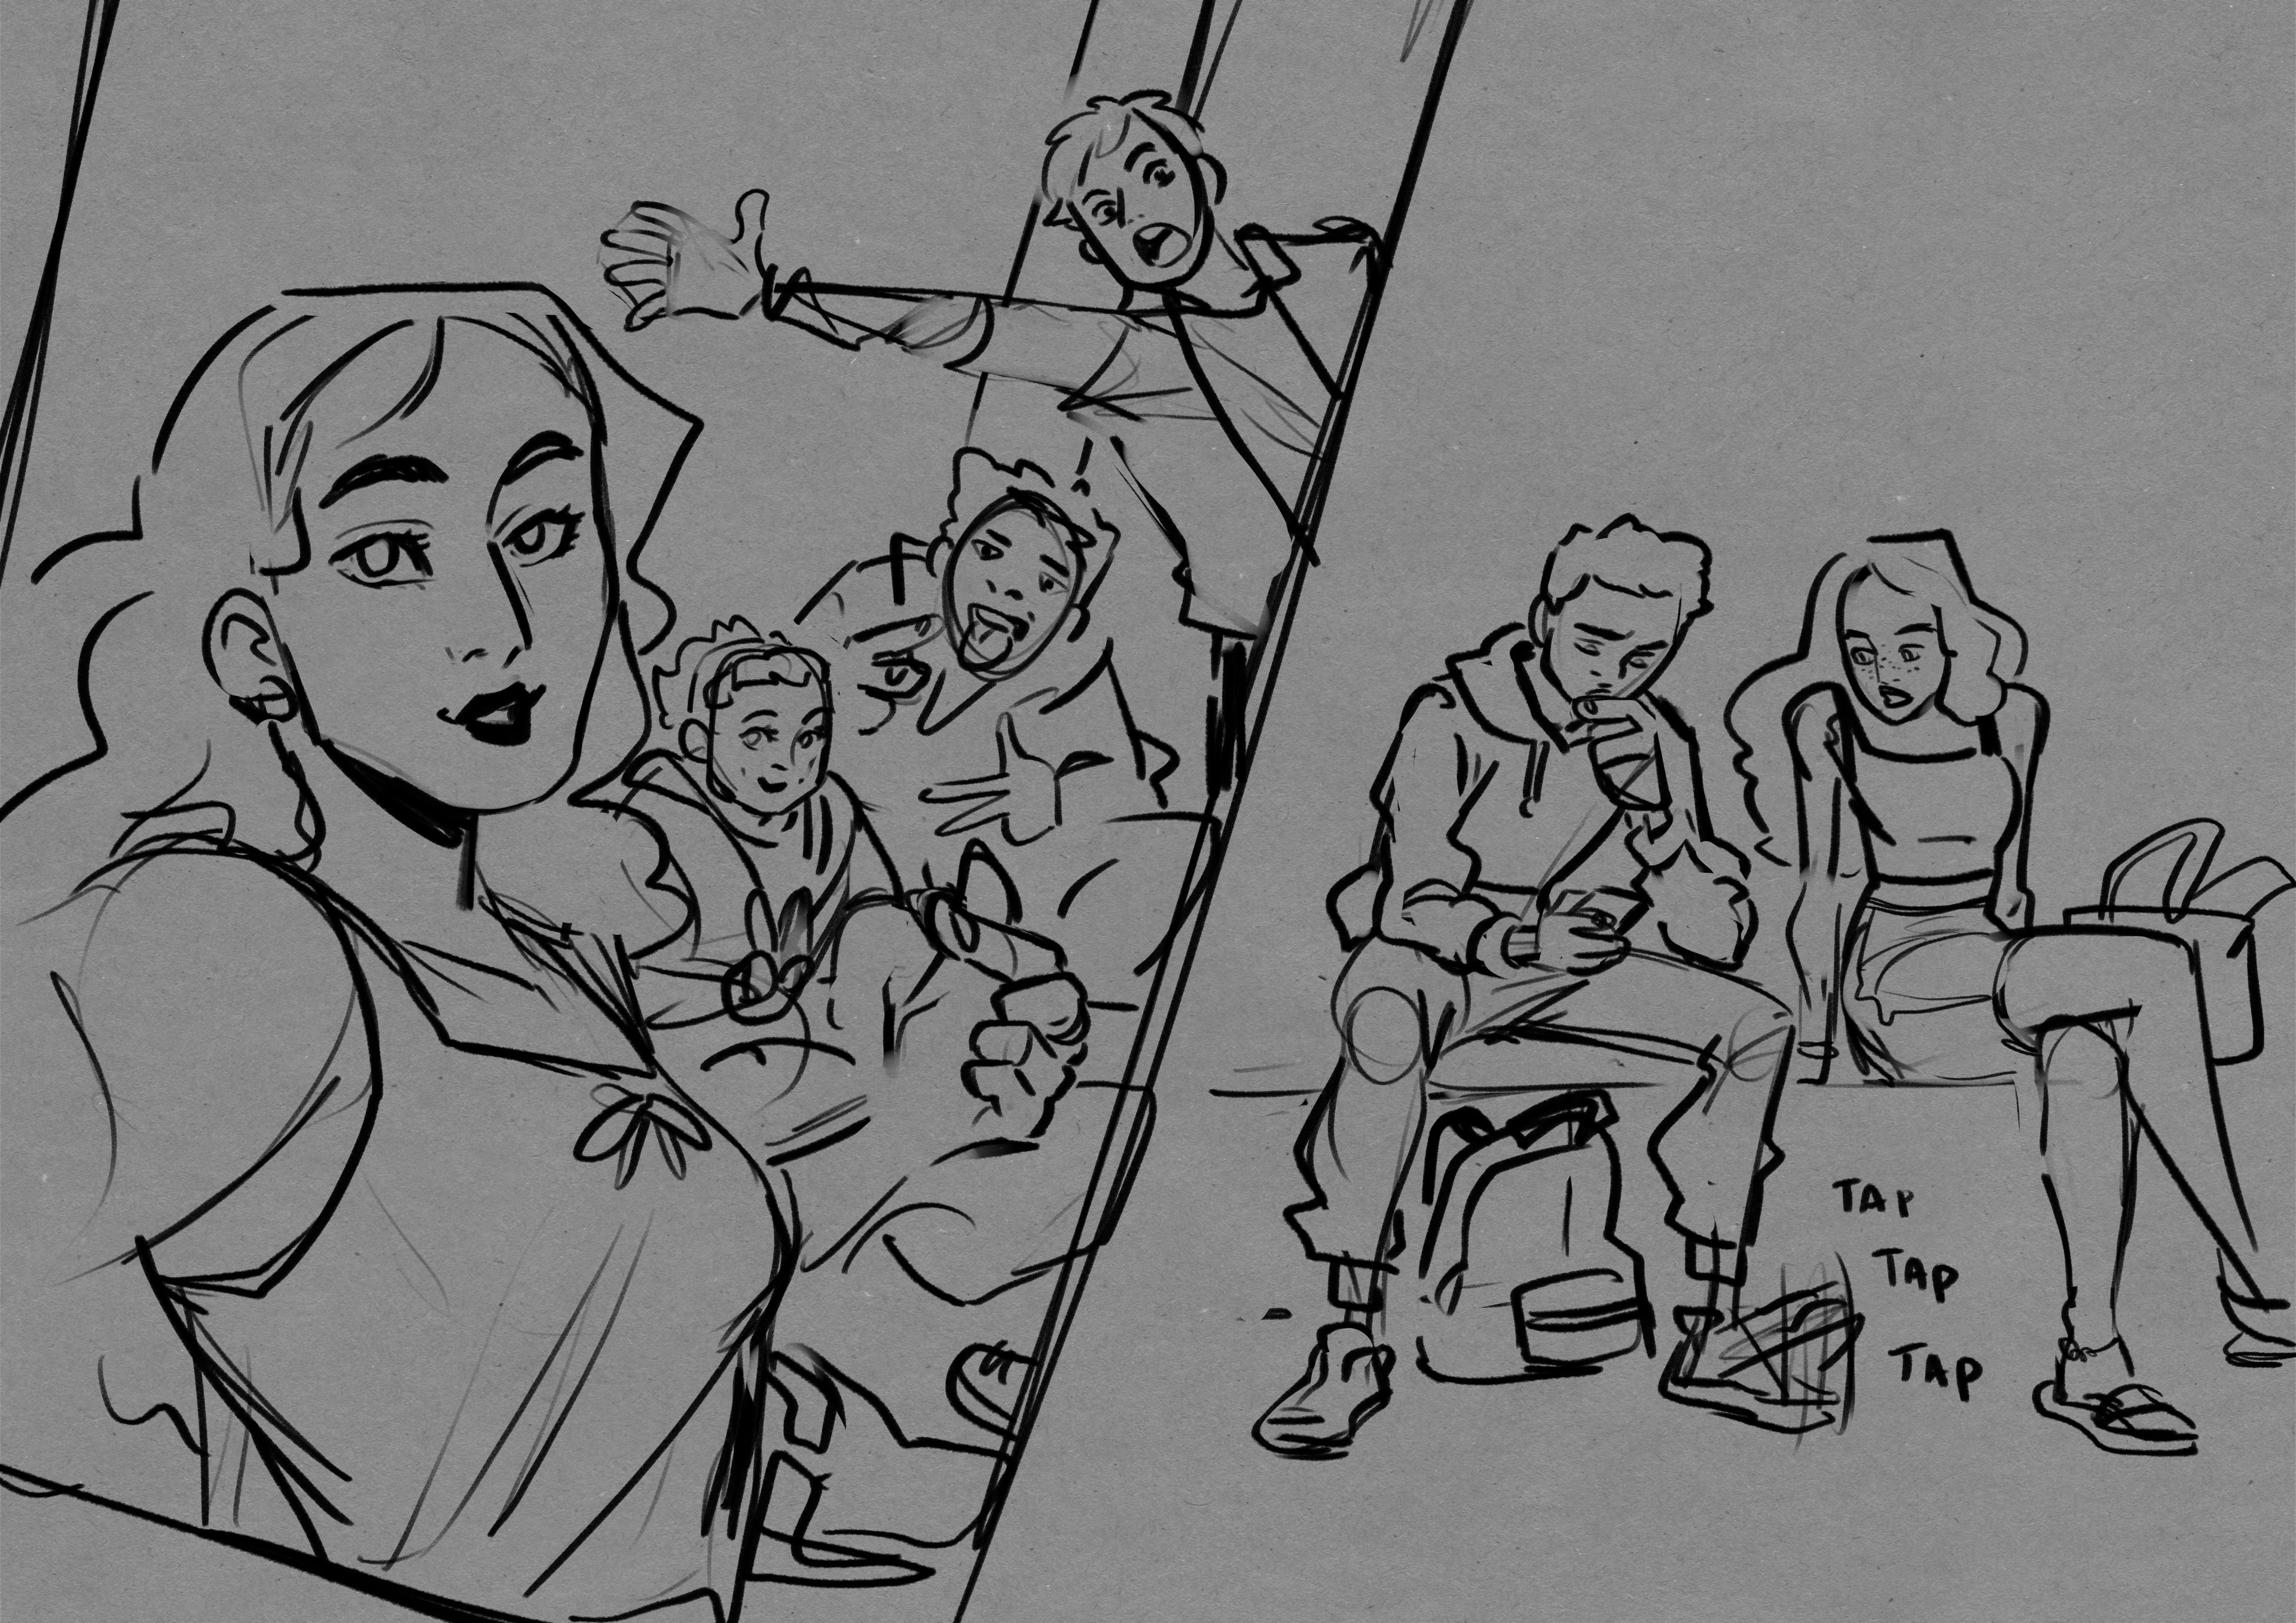 At this stage the story wasn’t ready but we had a pretty good idea of how they would look like (waiting the approval of the client) so I started sketching and exploring their group dynamic (at this point, the playable character wasn’t yet resolved.)